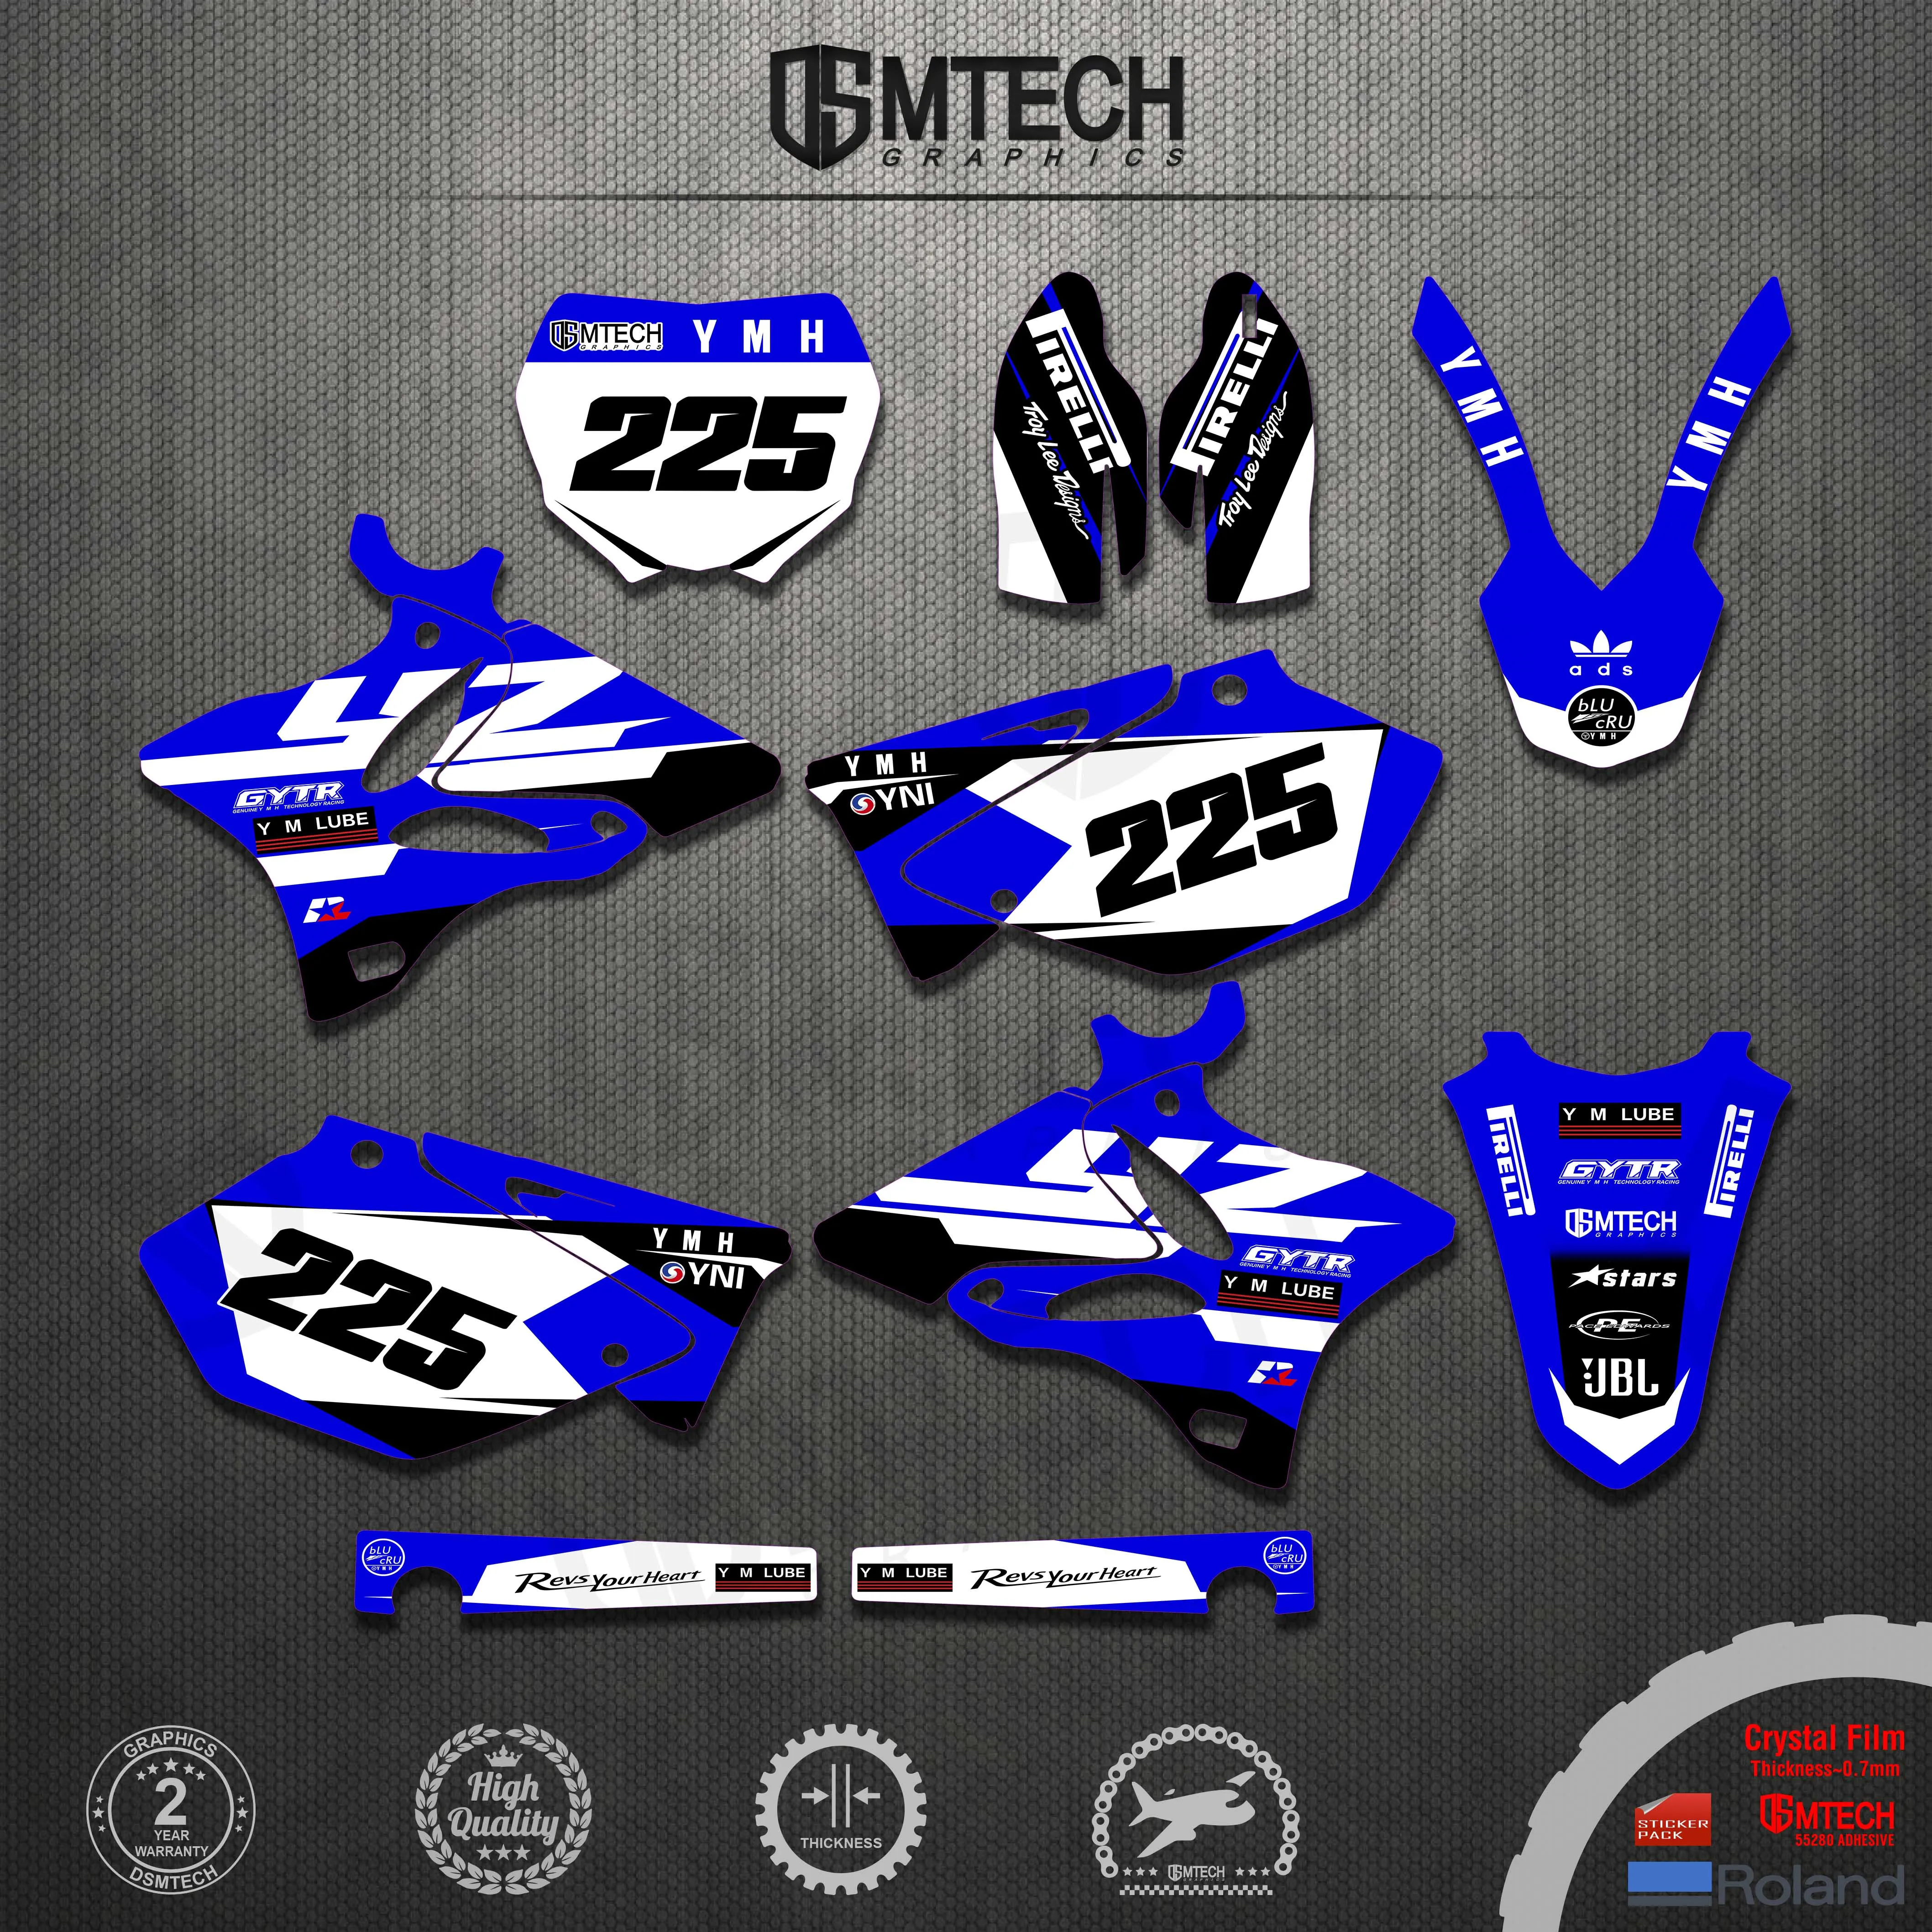 DSMTECH Stickers Decals Graphics kits For YAMAHA YZ125 YZ250 2002- 2005 2006 2007 2008 2009 2010 2011 2012 2013 2014 YZ 250